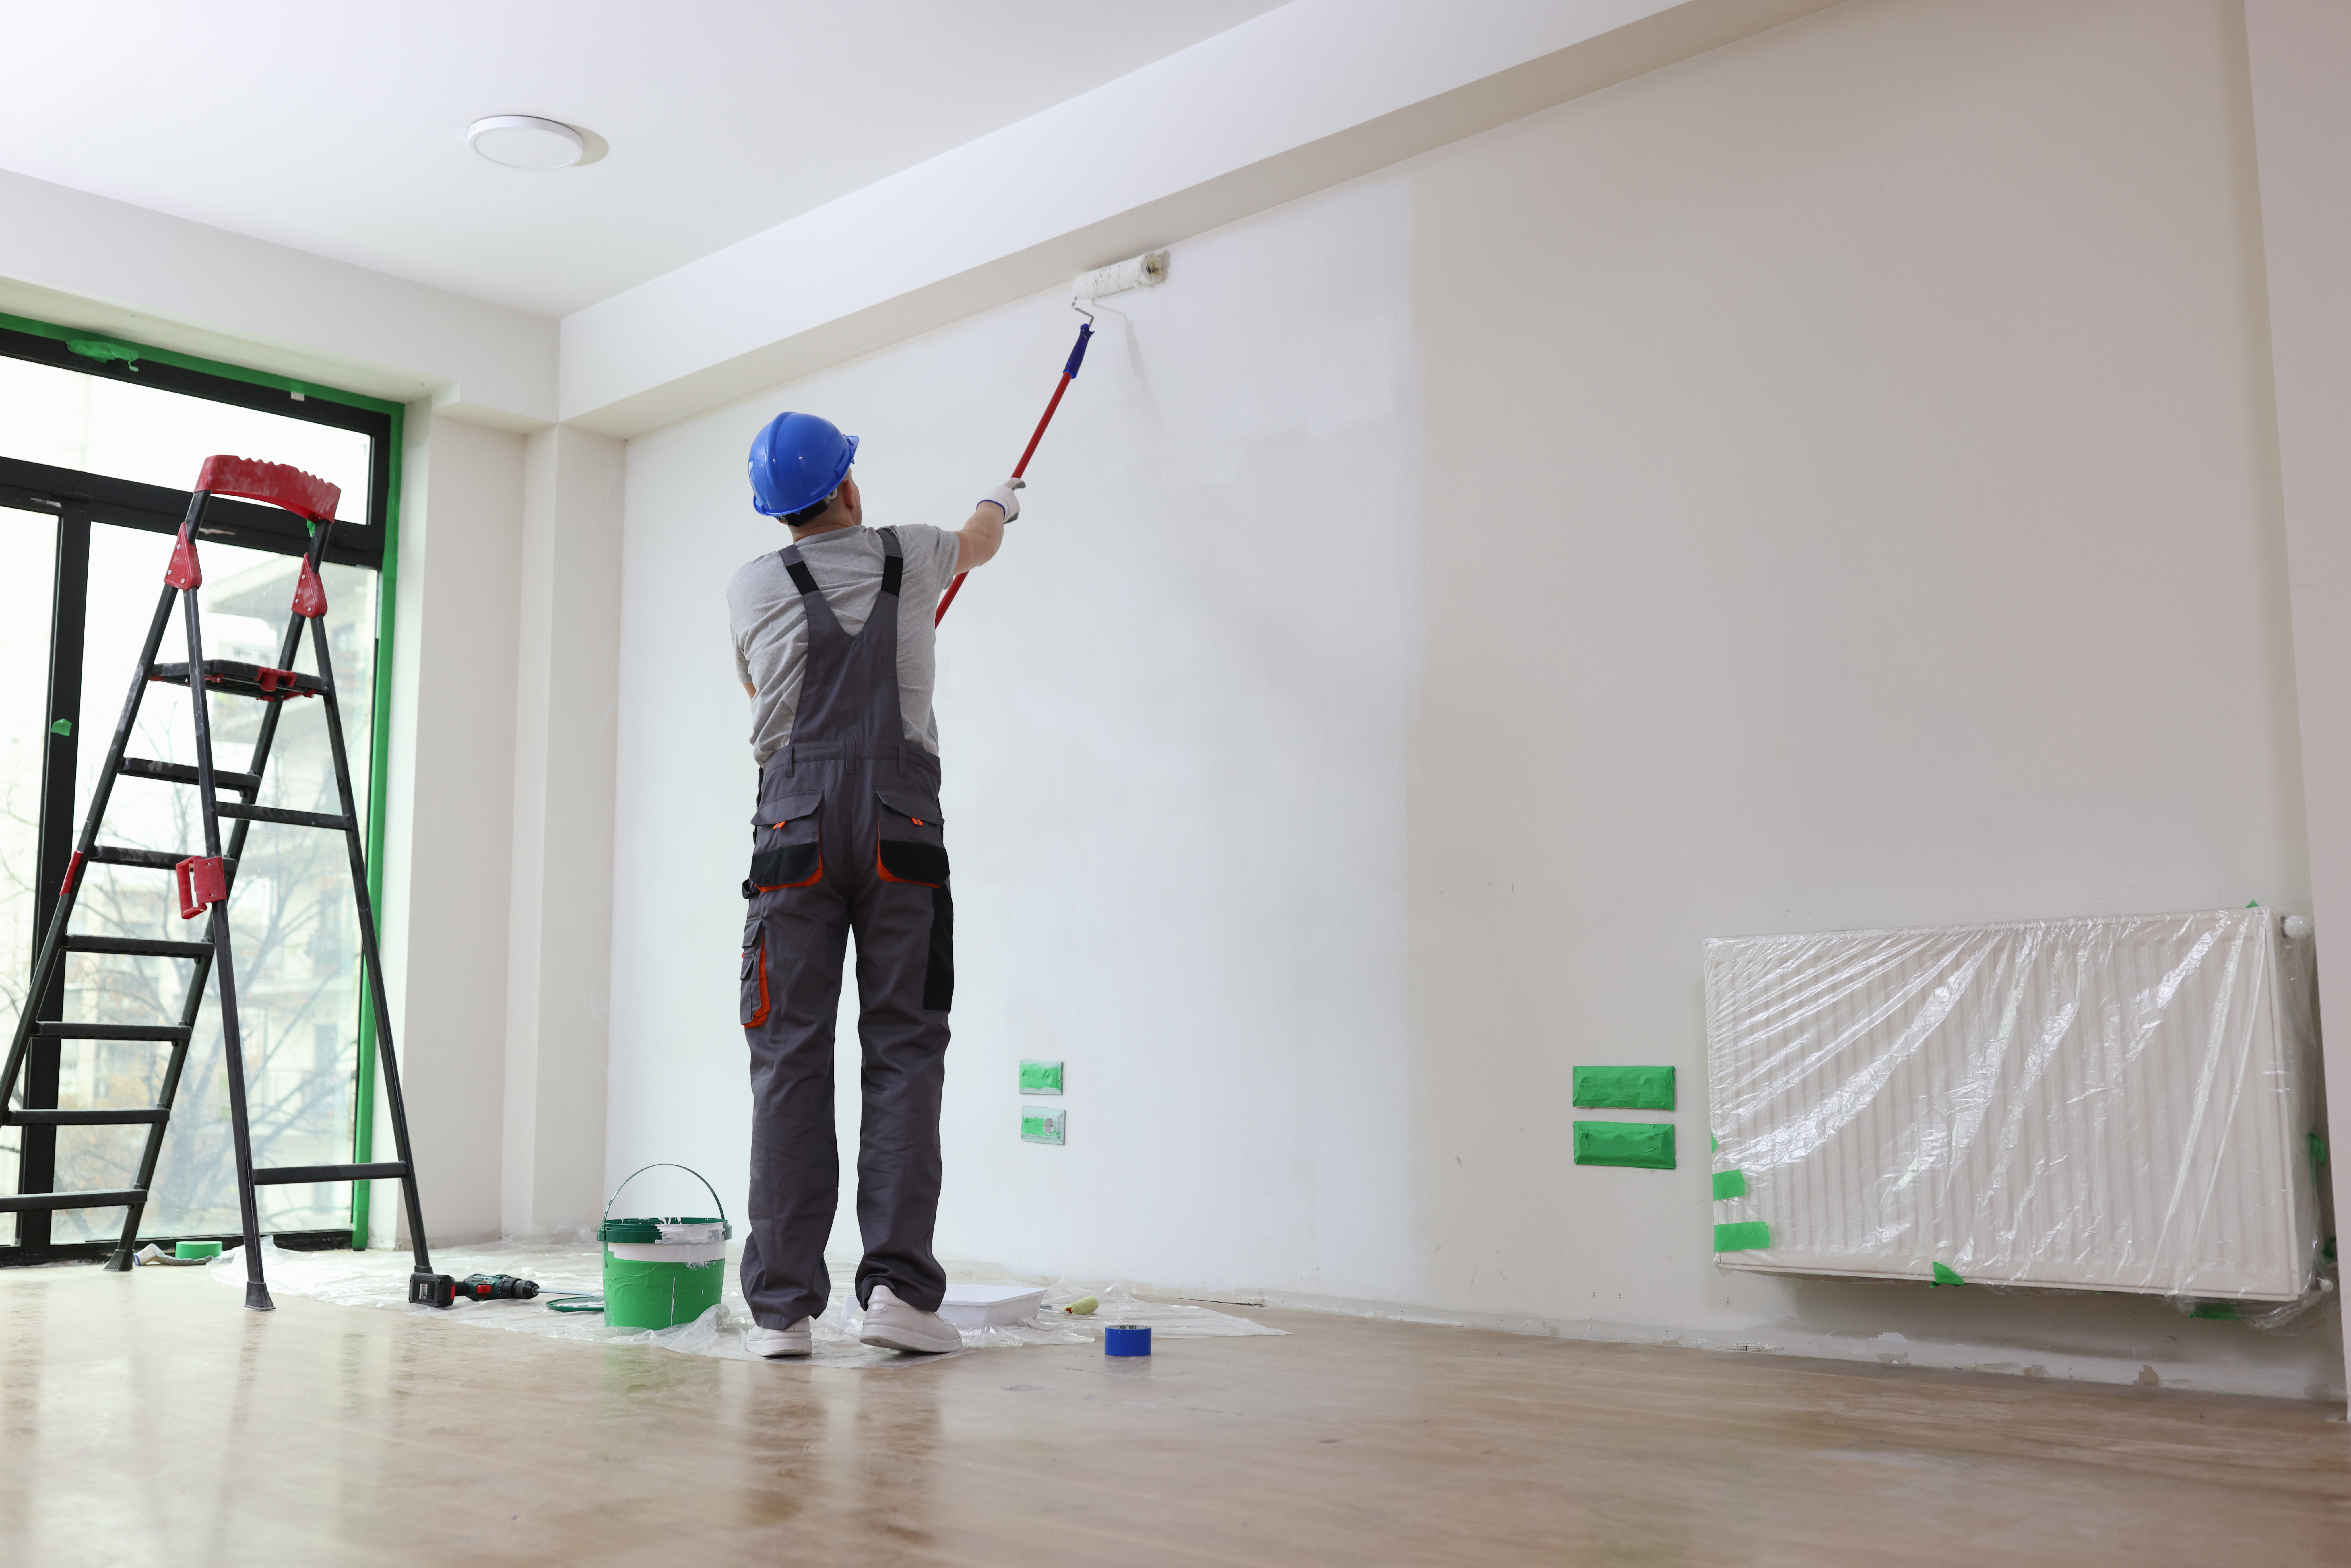 Interior and exterior painting services are a part of proper building maintenance services.